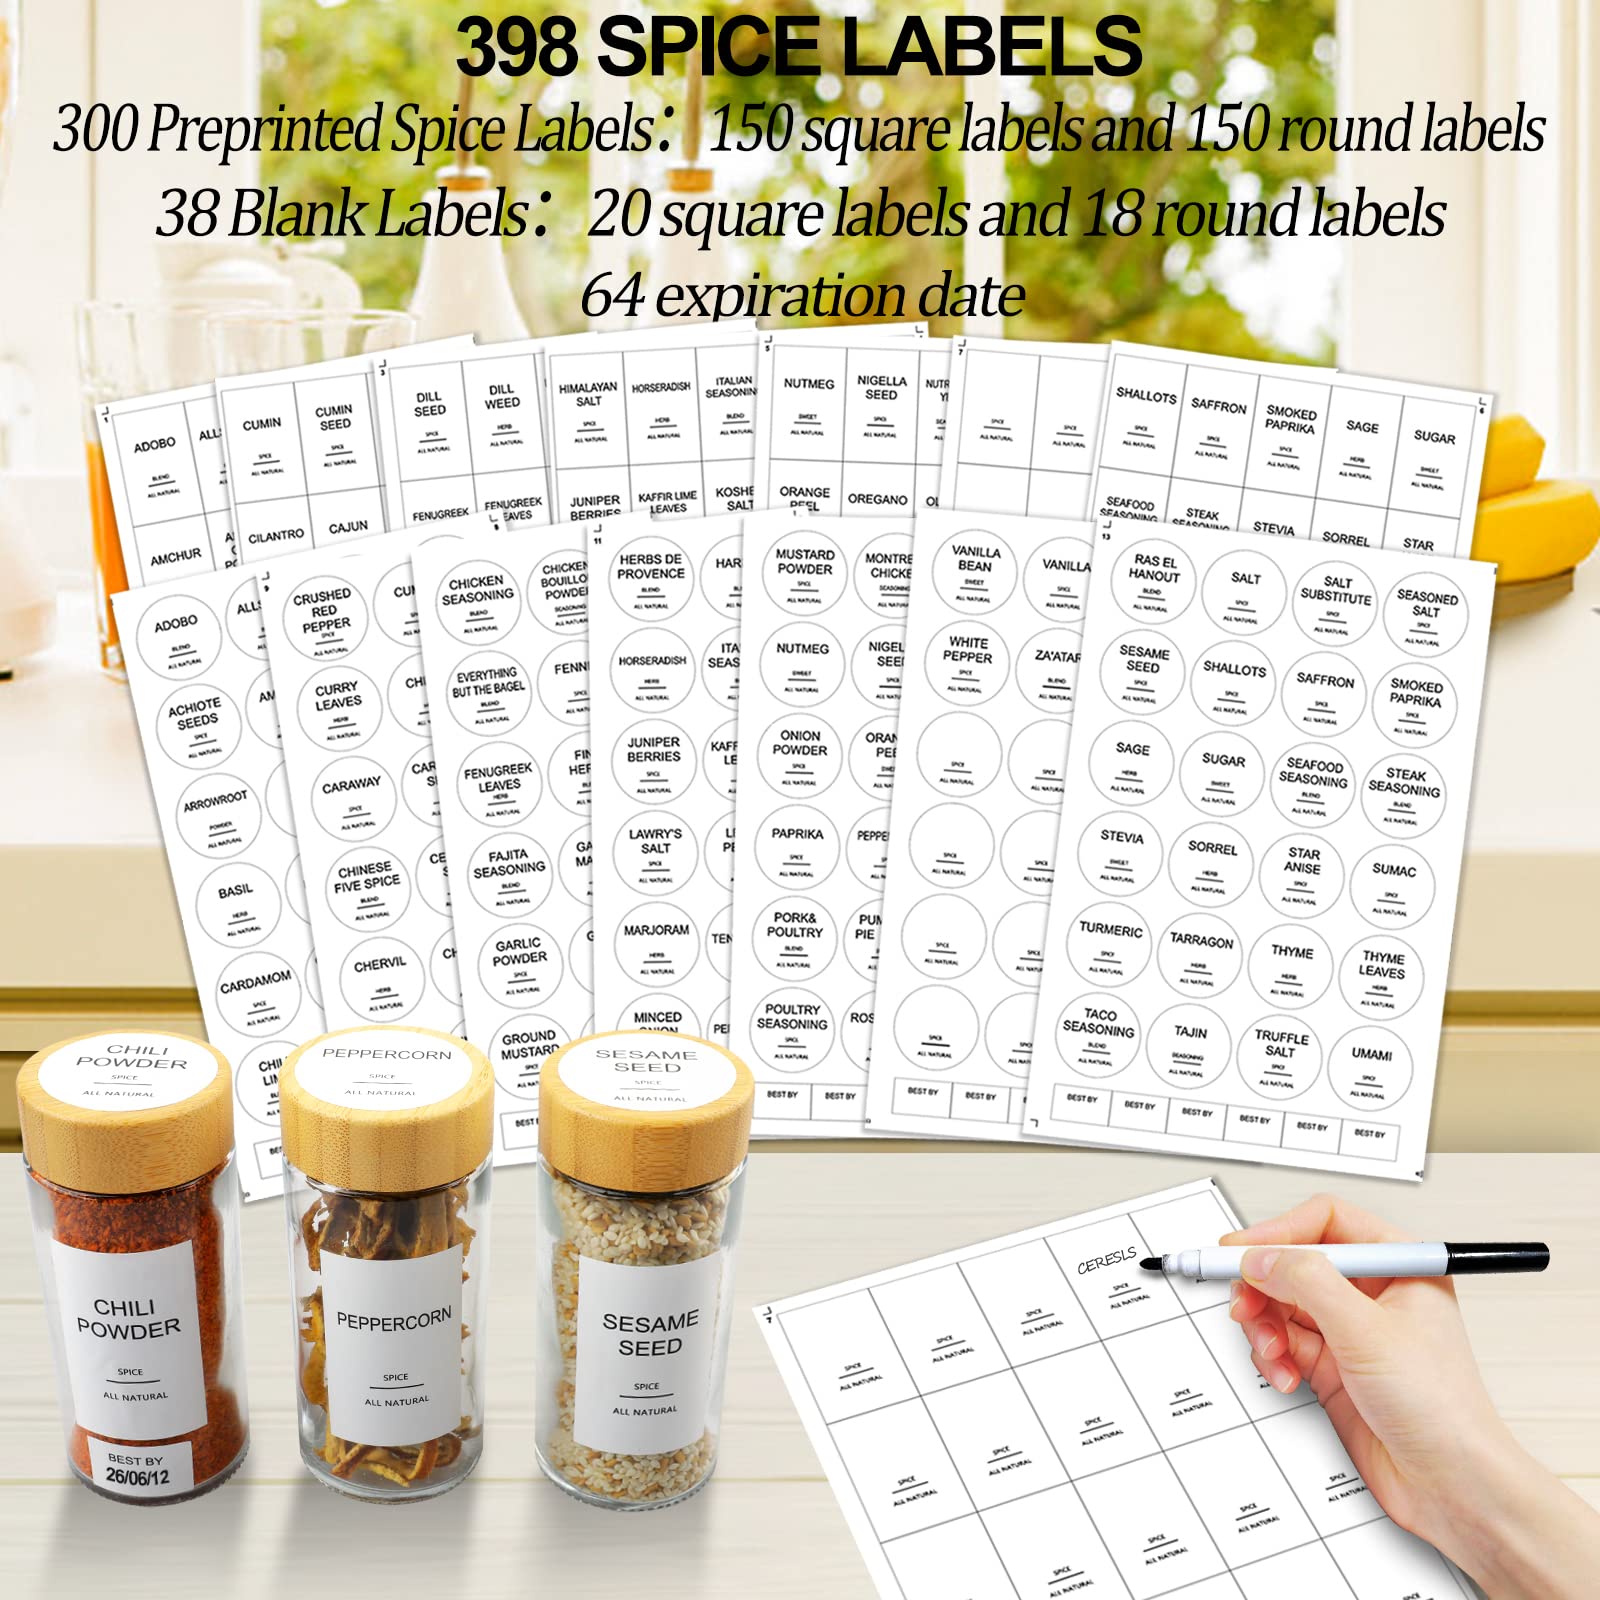 AISIPRIN Glass Spice Jars with 398 Labels-4oz 24 Pcs,Round Seasoning Jars with Bamboo Airtight Lids,Salt and Pepper Shakers Container Set -Shaker Lids, Funnel,Brush and Marker Included